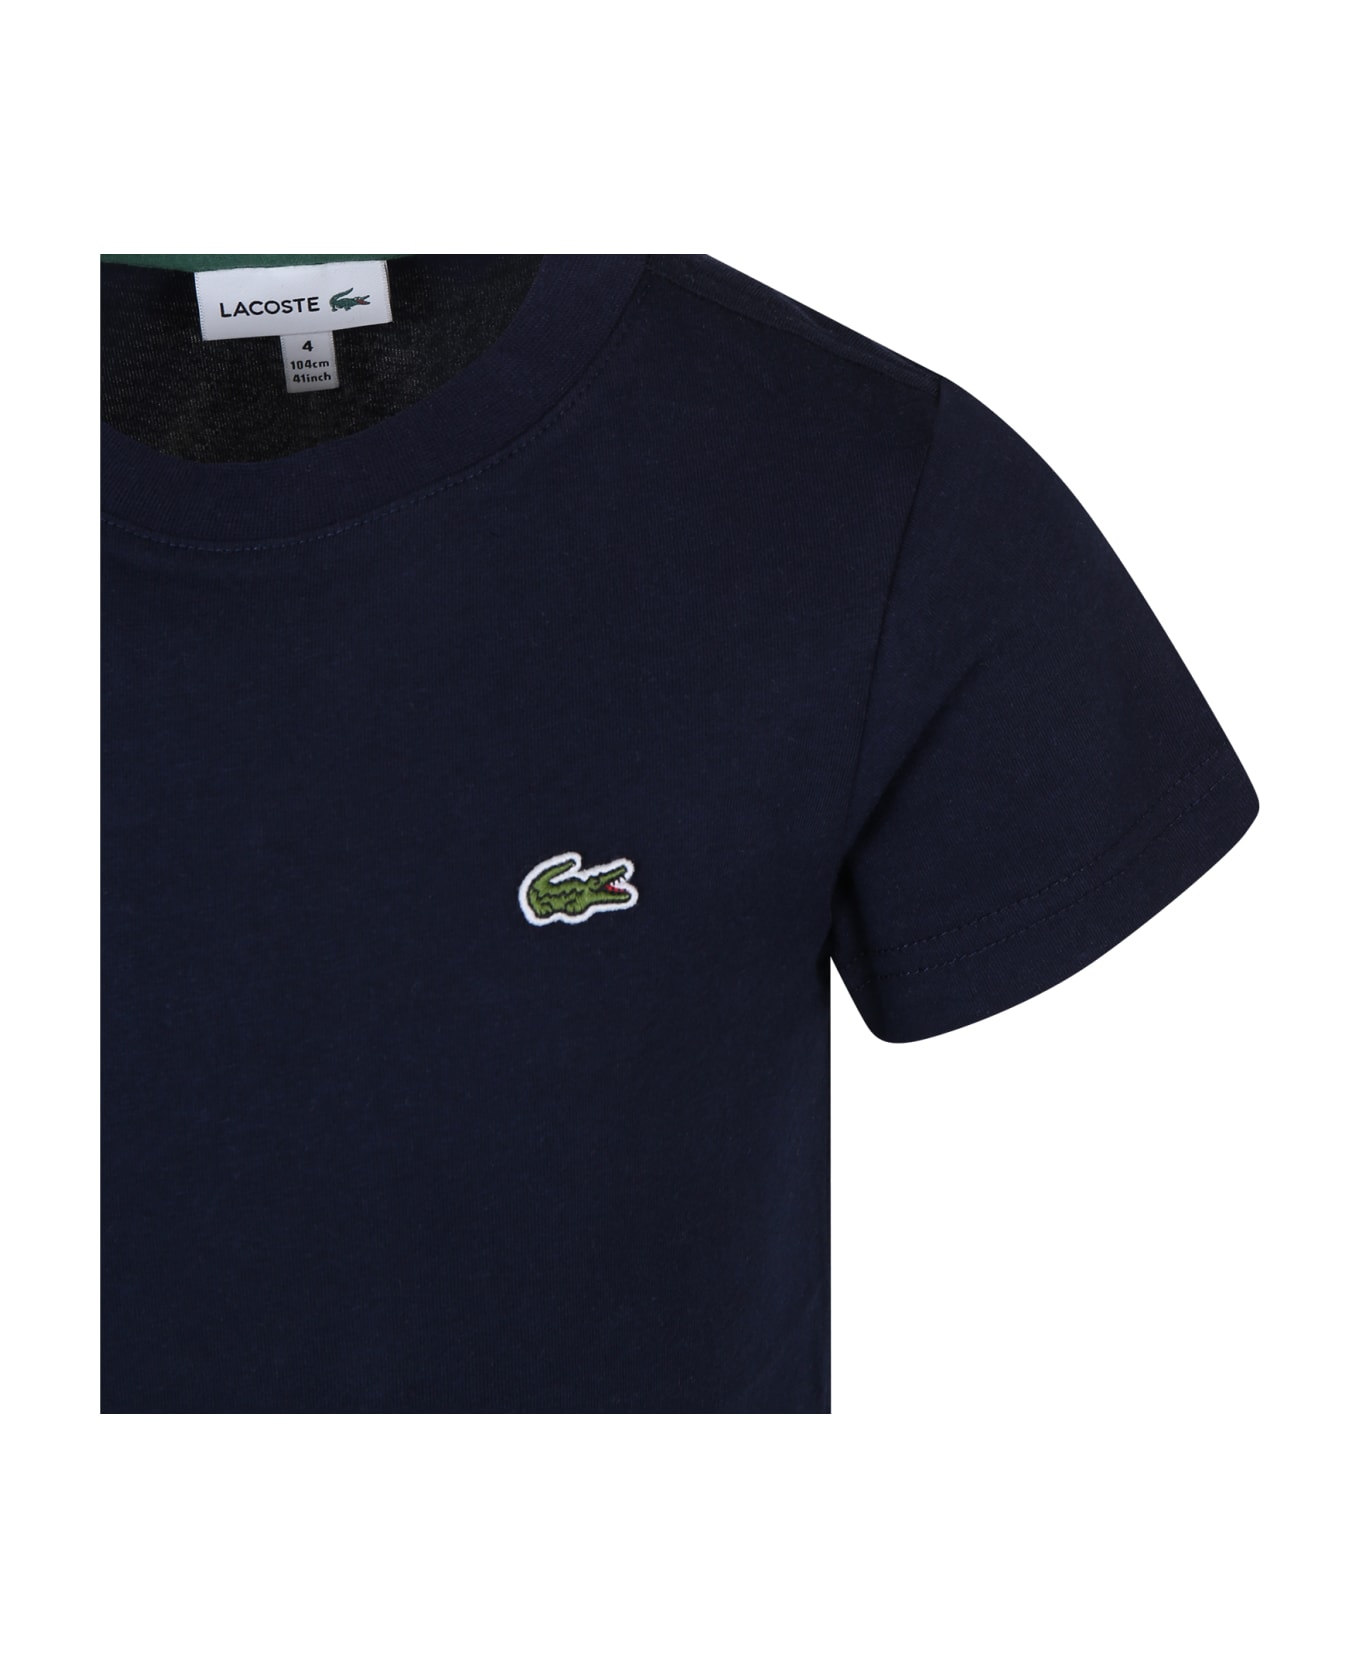 Lacoste Blue T-shirt For Boy With Crocodile - Blue